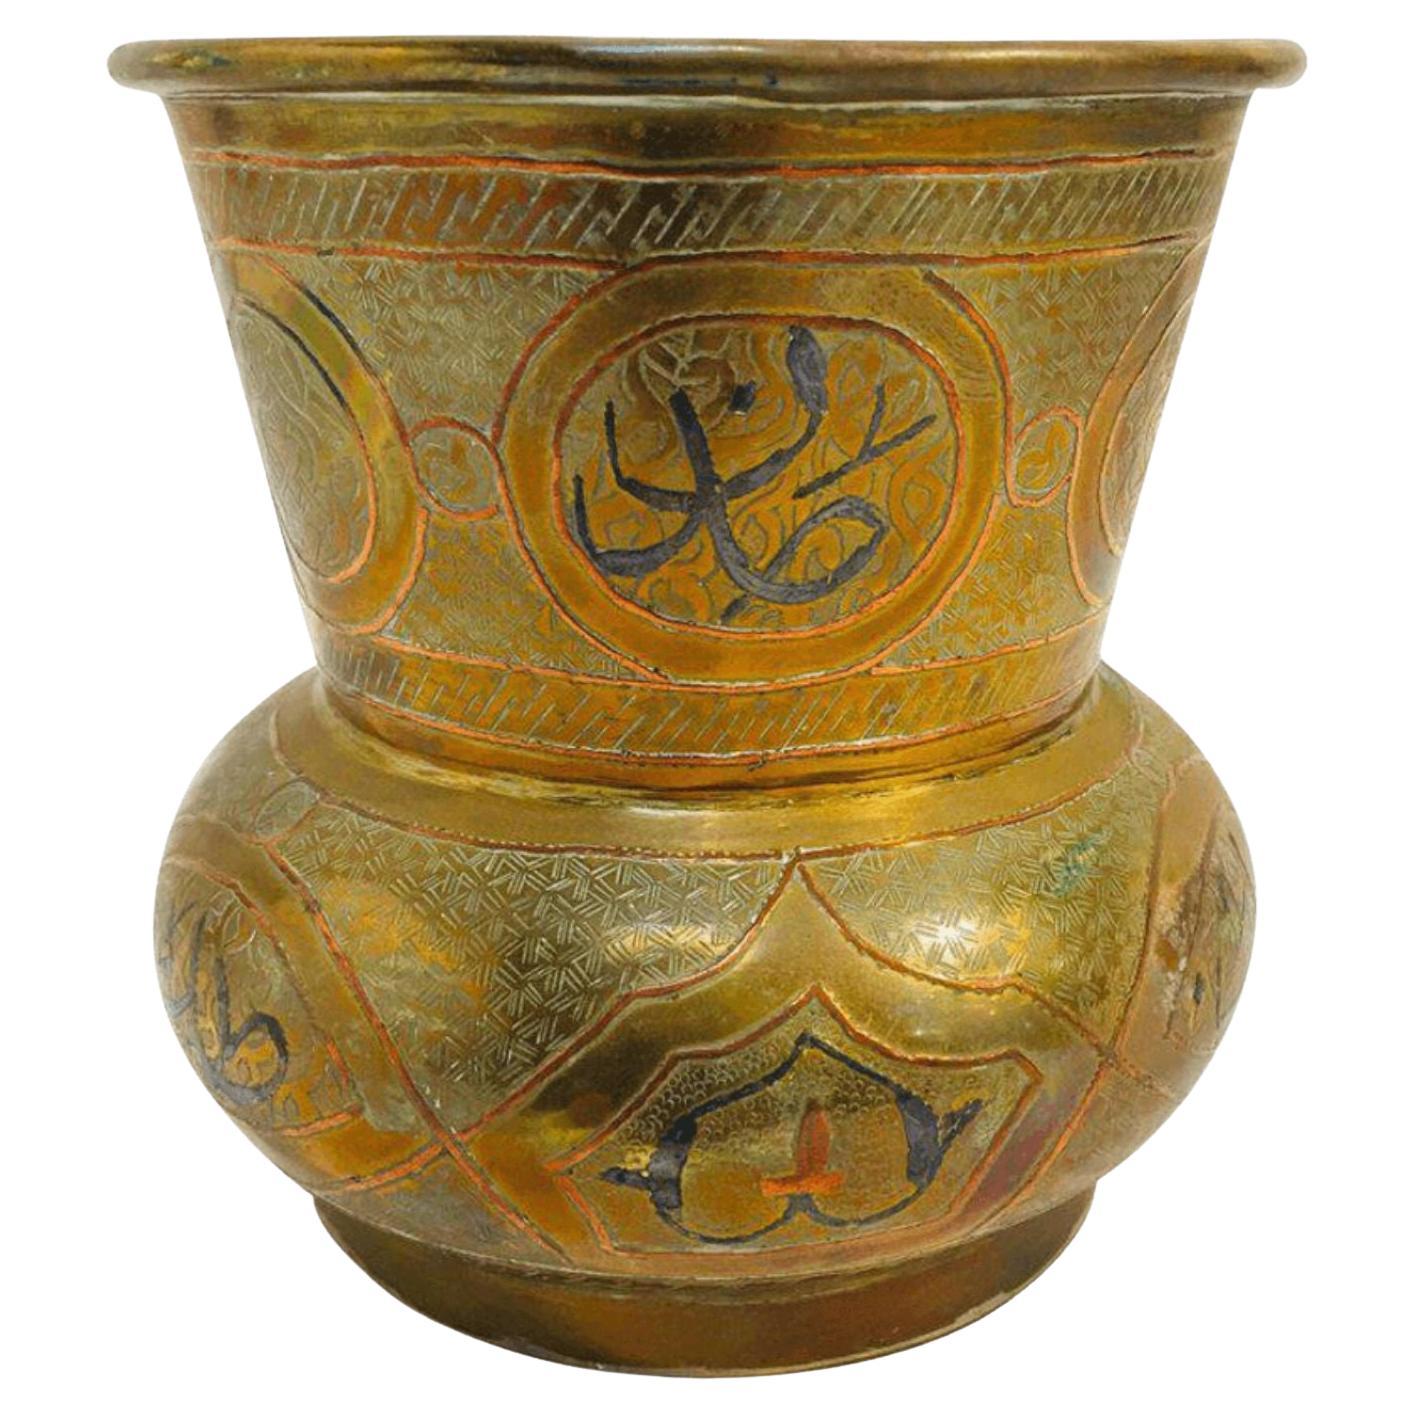 20th Century Middle Eastern Etched Islamic Brass Vase With Arabic Writing